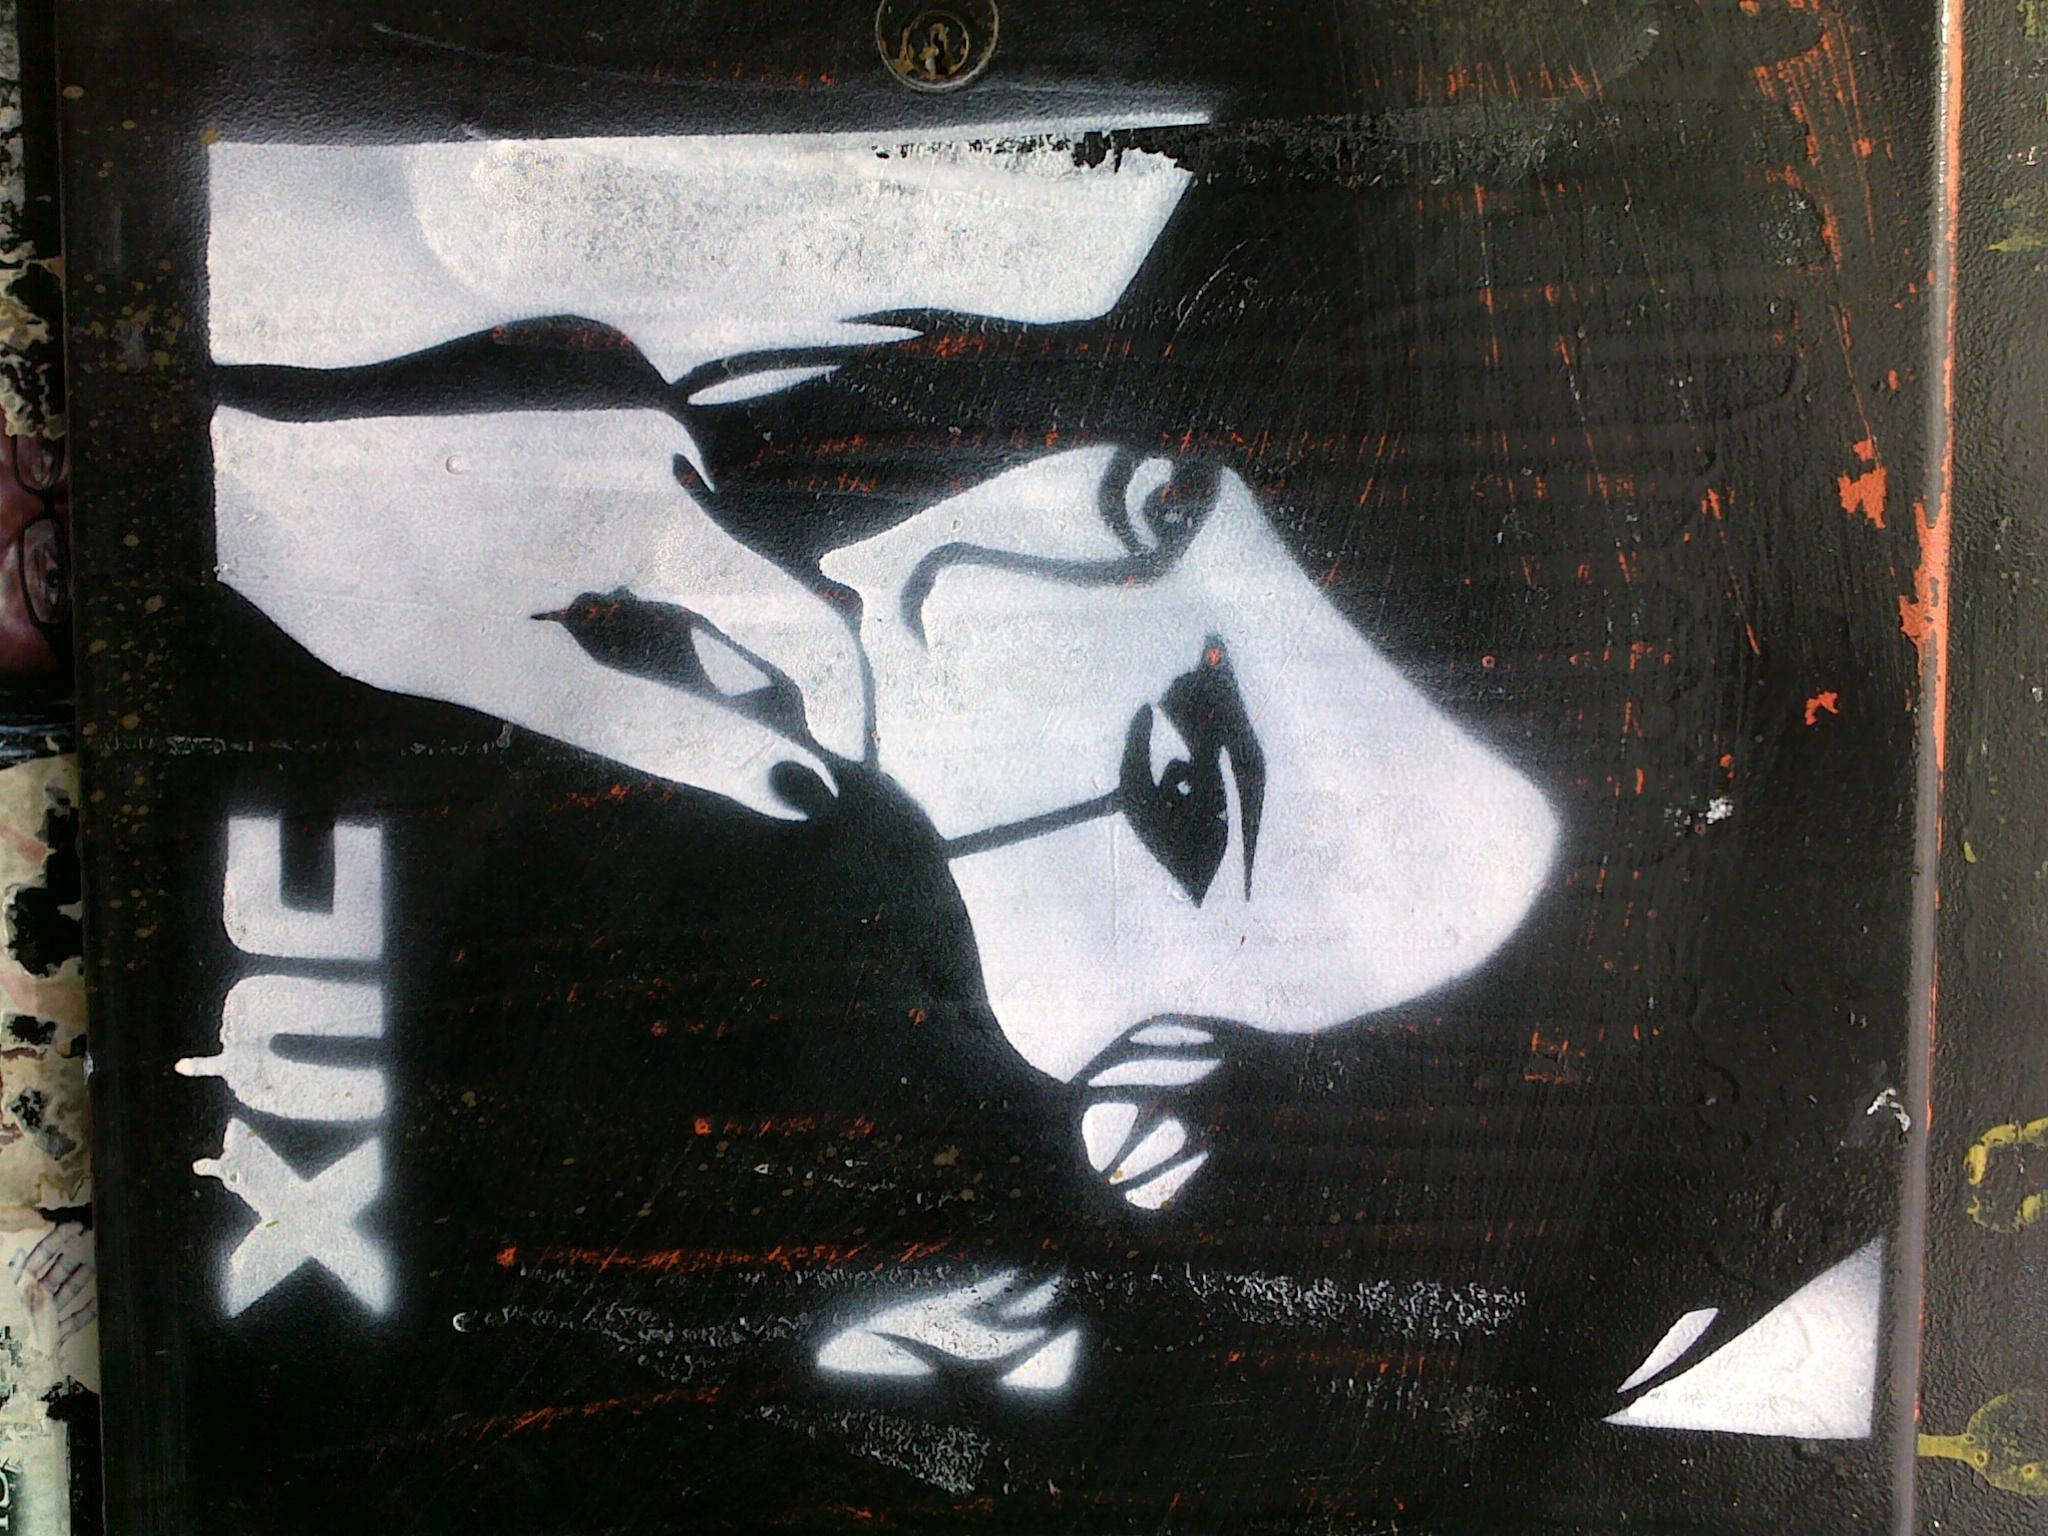 some black and white art that has graffiti on it